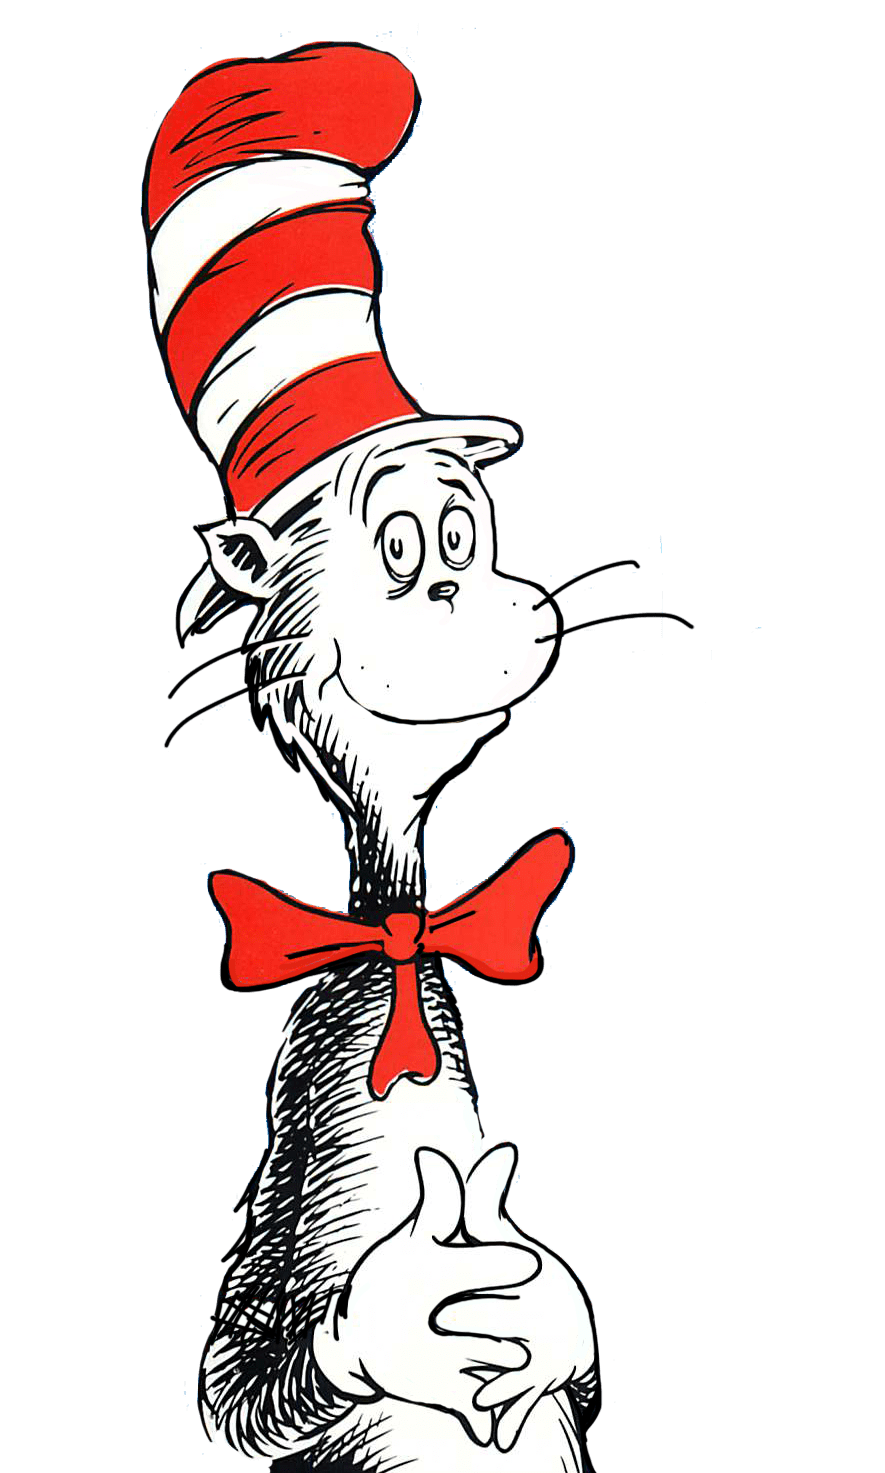 Seuss Wiki-background.png